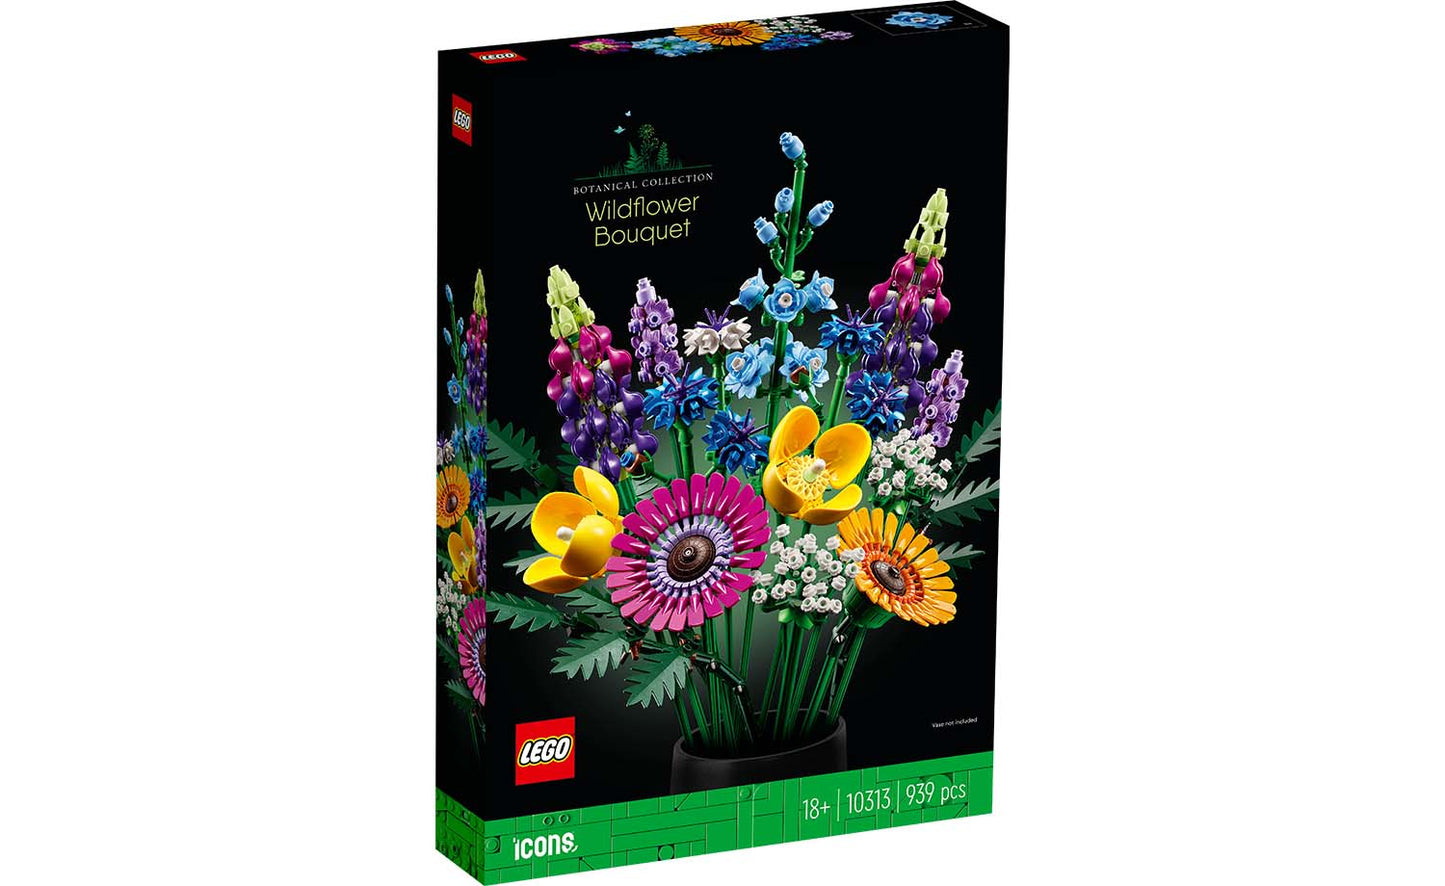 Lego Botanical Collection - Wildflower Bouquet